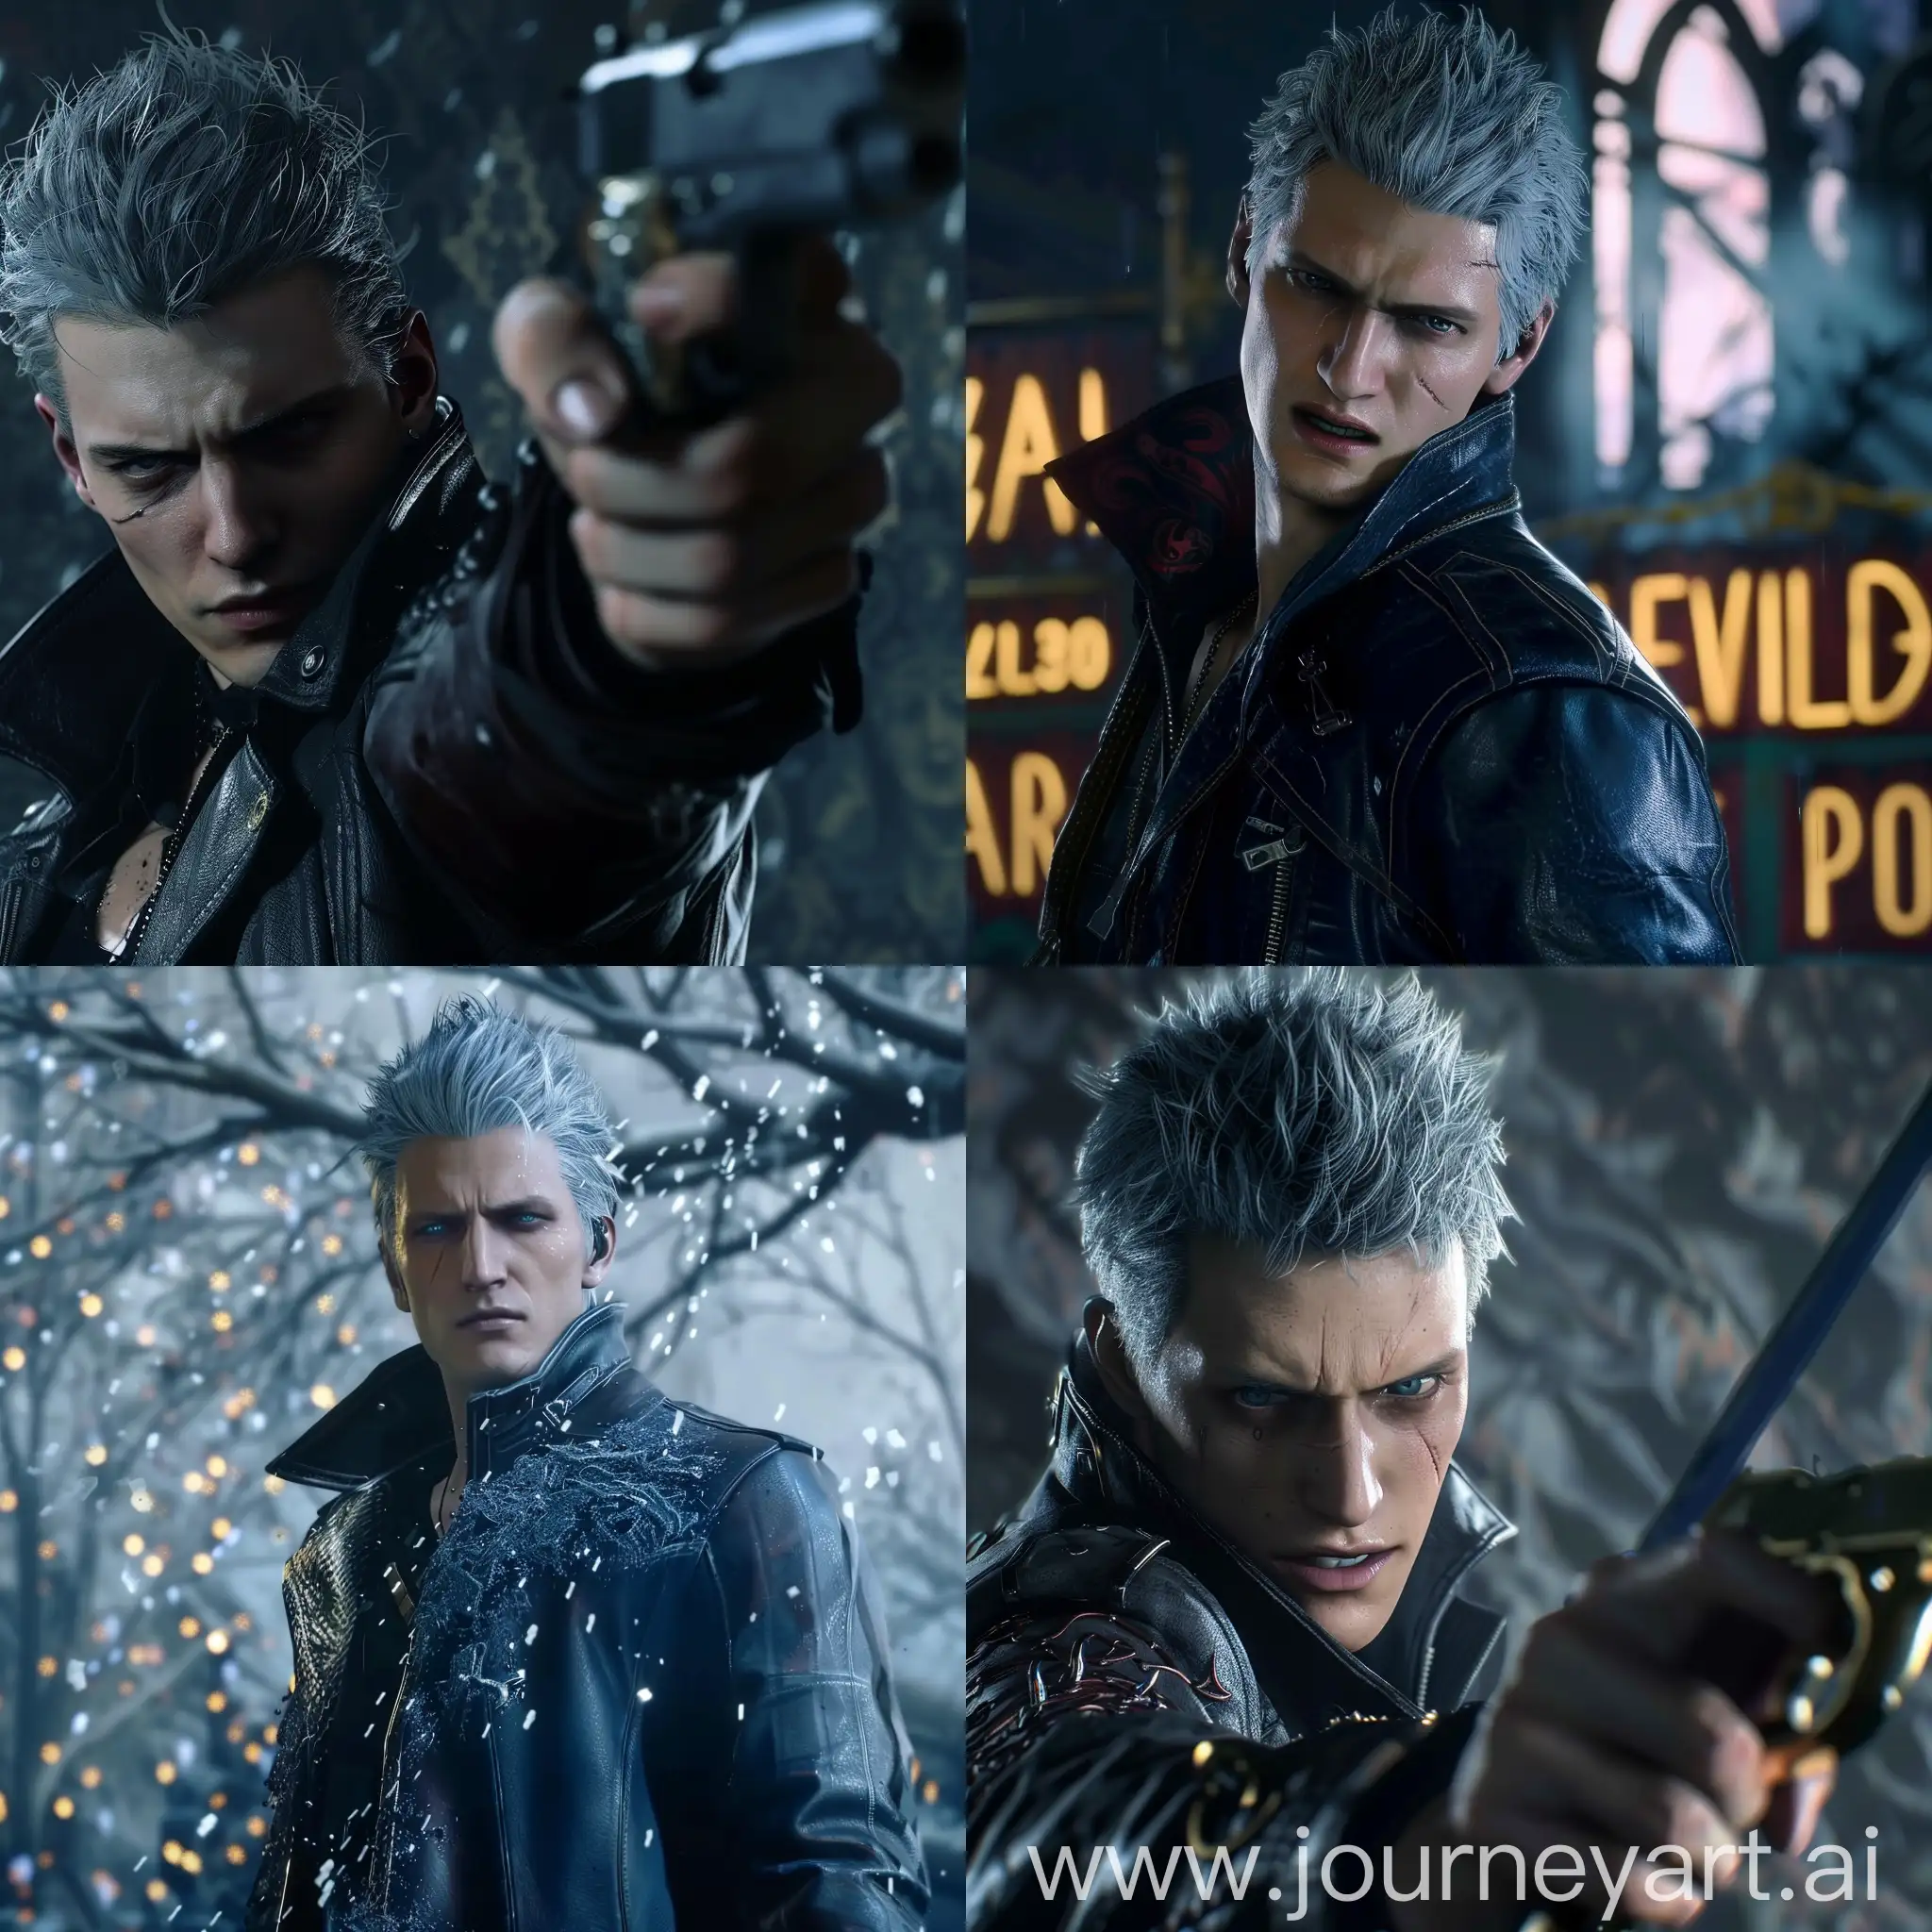 Vergil-Provocation-Intense-Confrontation-Scene-from-Devil-May-Cry-5